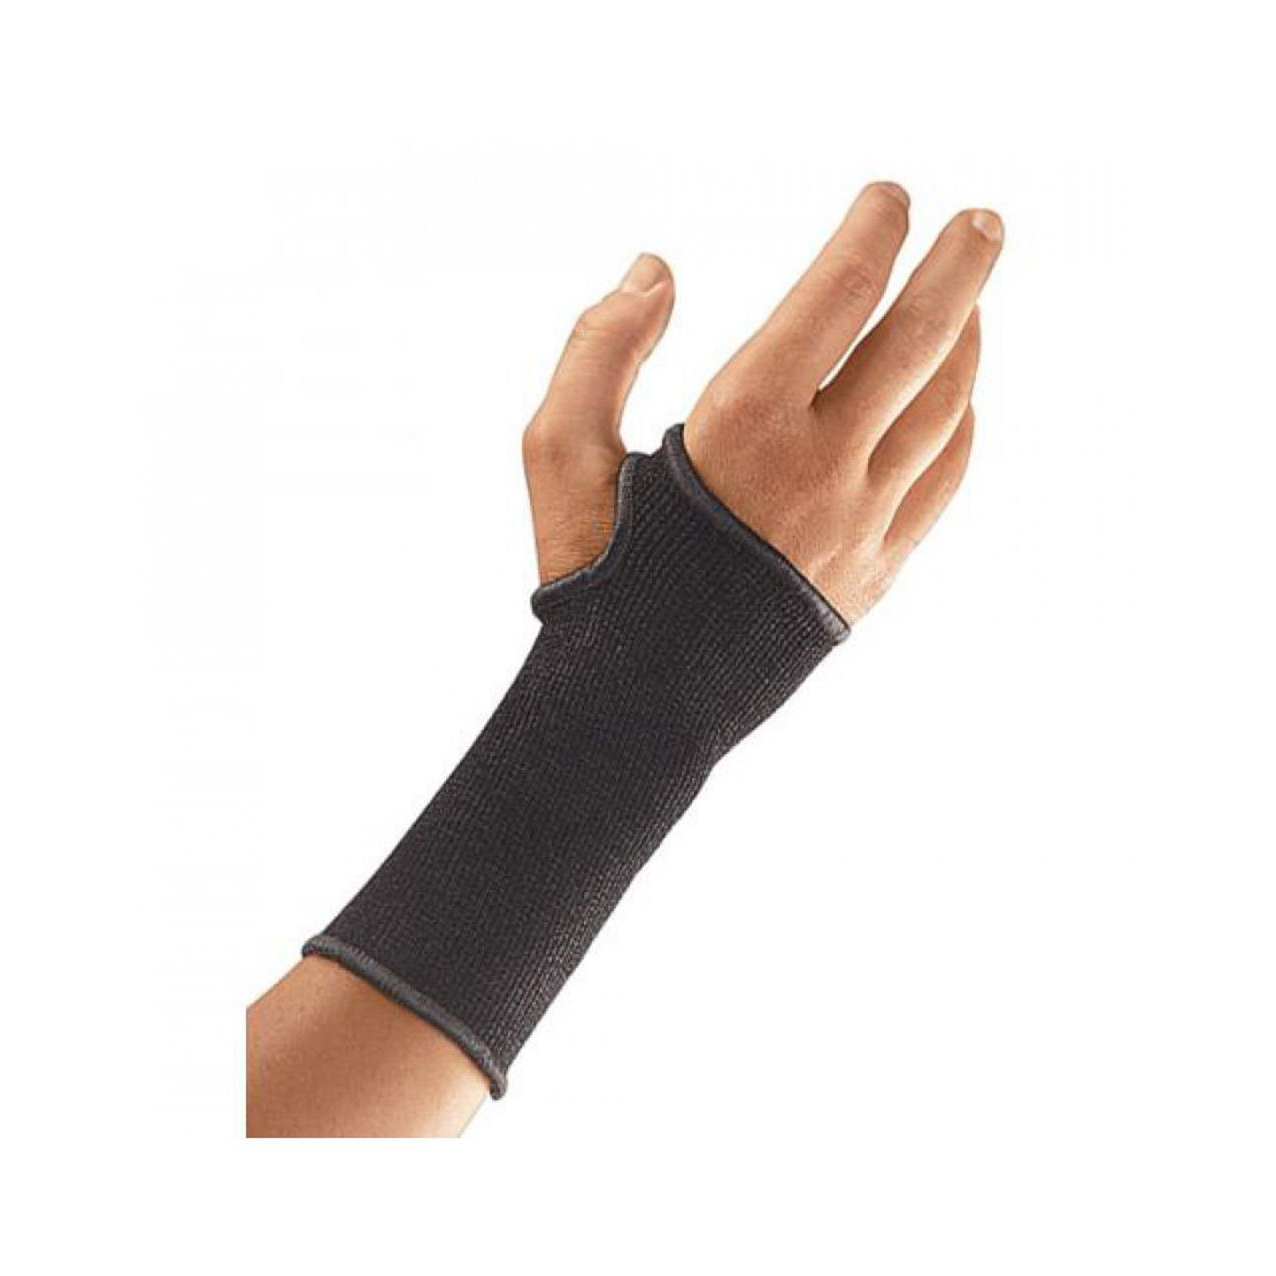 Wrist Support Wrist Brace Compression Sleeve with Splints for